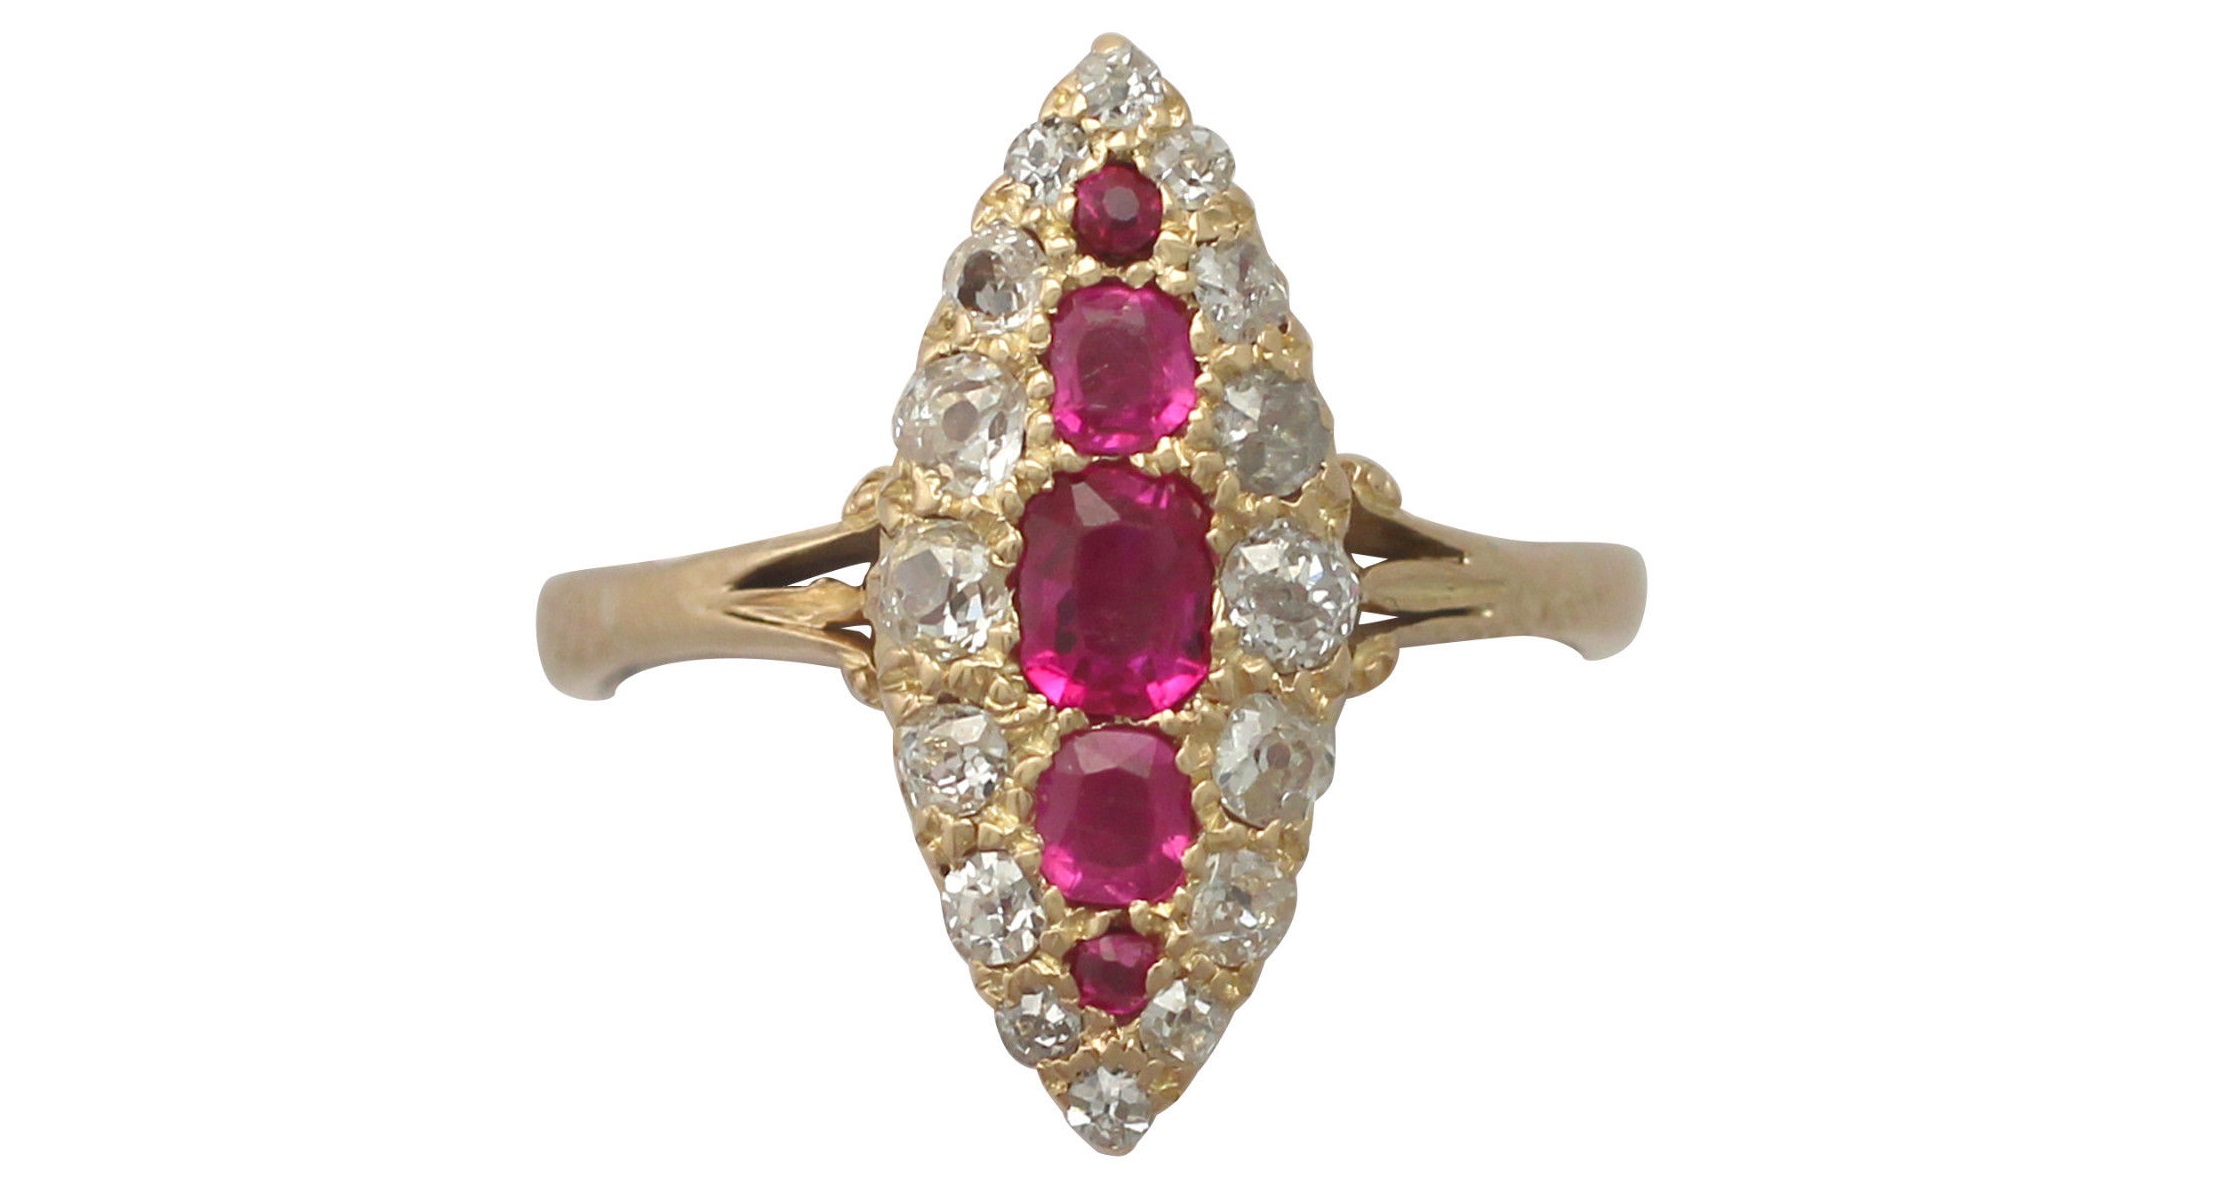 0.62ct Ruby & 0.46ct Diamond, 18ct Yellow Gold Marquise Ring - Antique